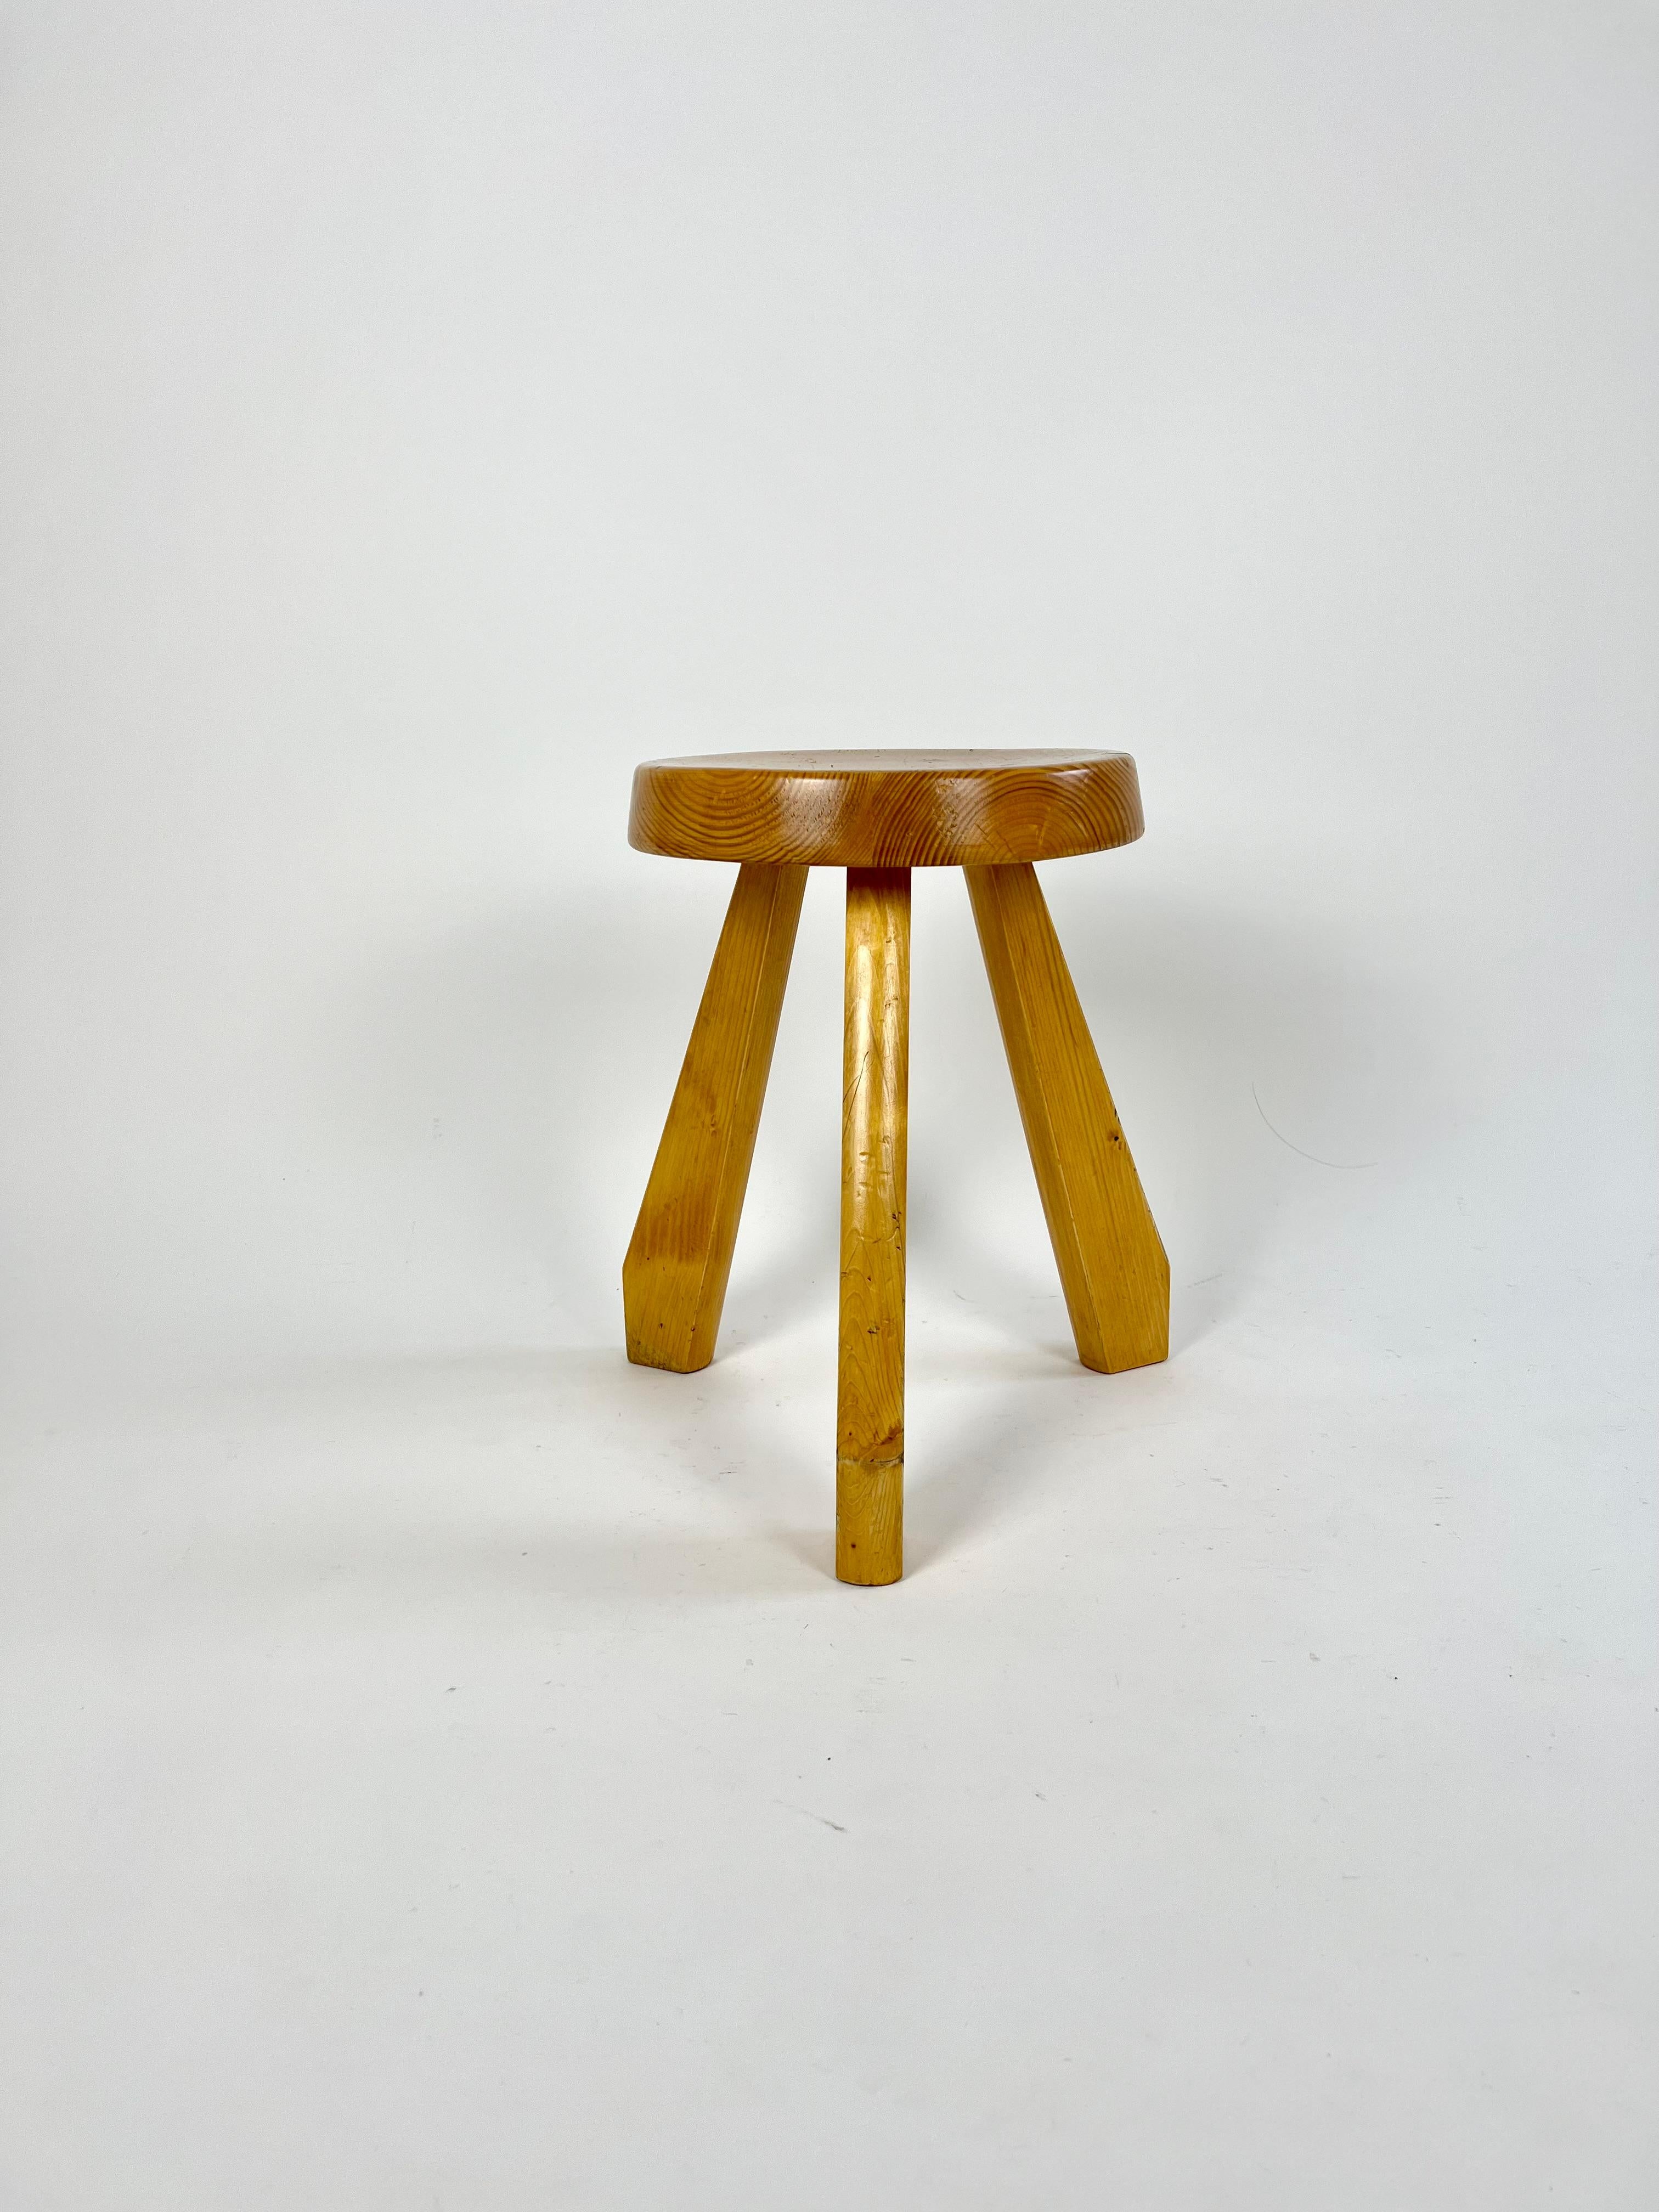 Pine stool by Charlotte Perriand, circa 1960 from Les Arcs, France.

Sourced from a chalet clearance in the Haute Savoie region of France.

Original condition, with signs of age and use, age related wear as pictured. Structurally solid with no